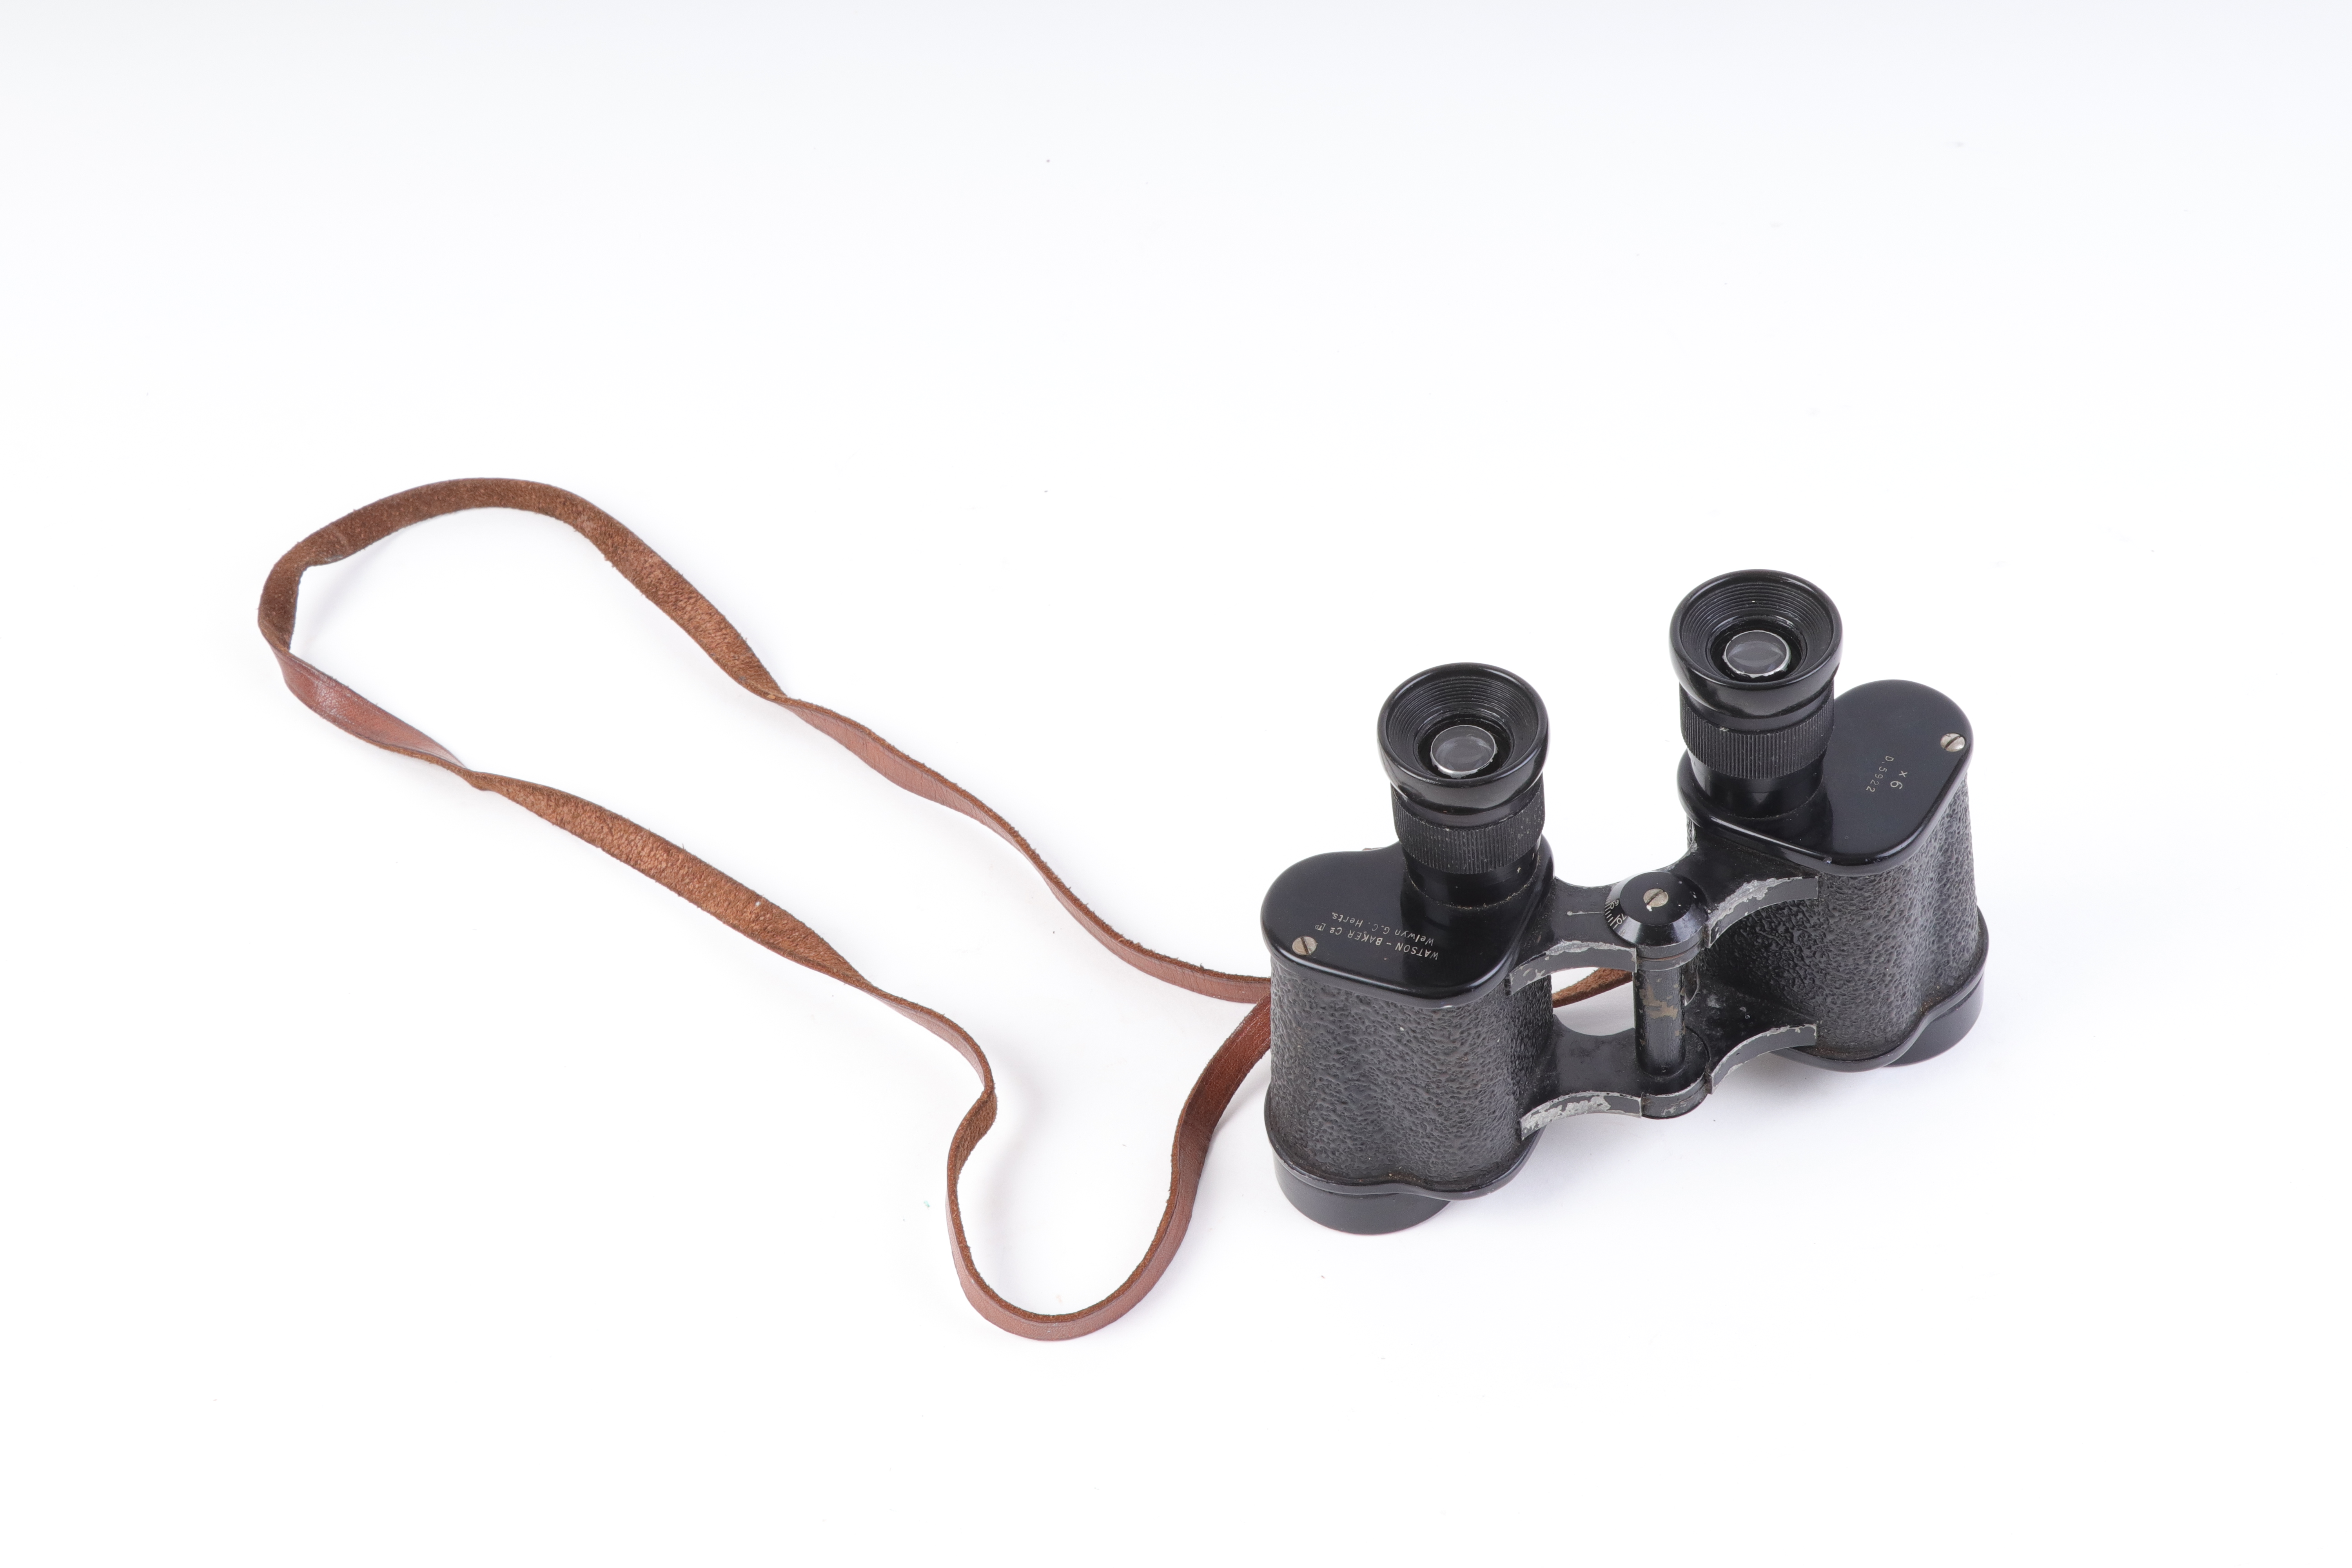 WWII Barr & Stroud C.F.41 7x military binoculars, broad arrow marks, with expanding weather shields - Image 9 of 14